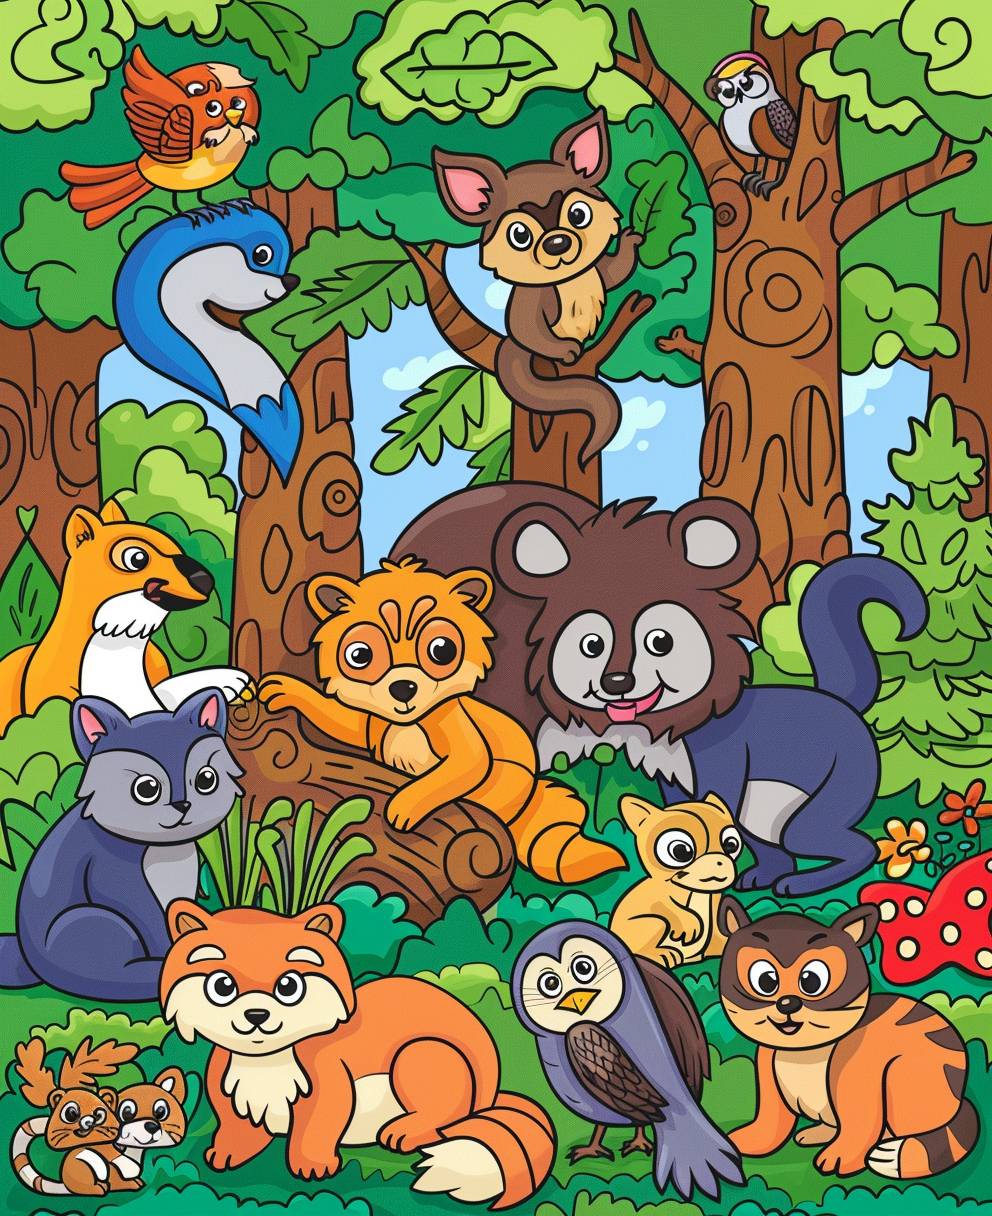 Animal coloring book cover page, cartoon style, low detail, vivid color.